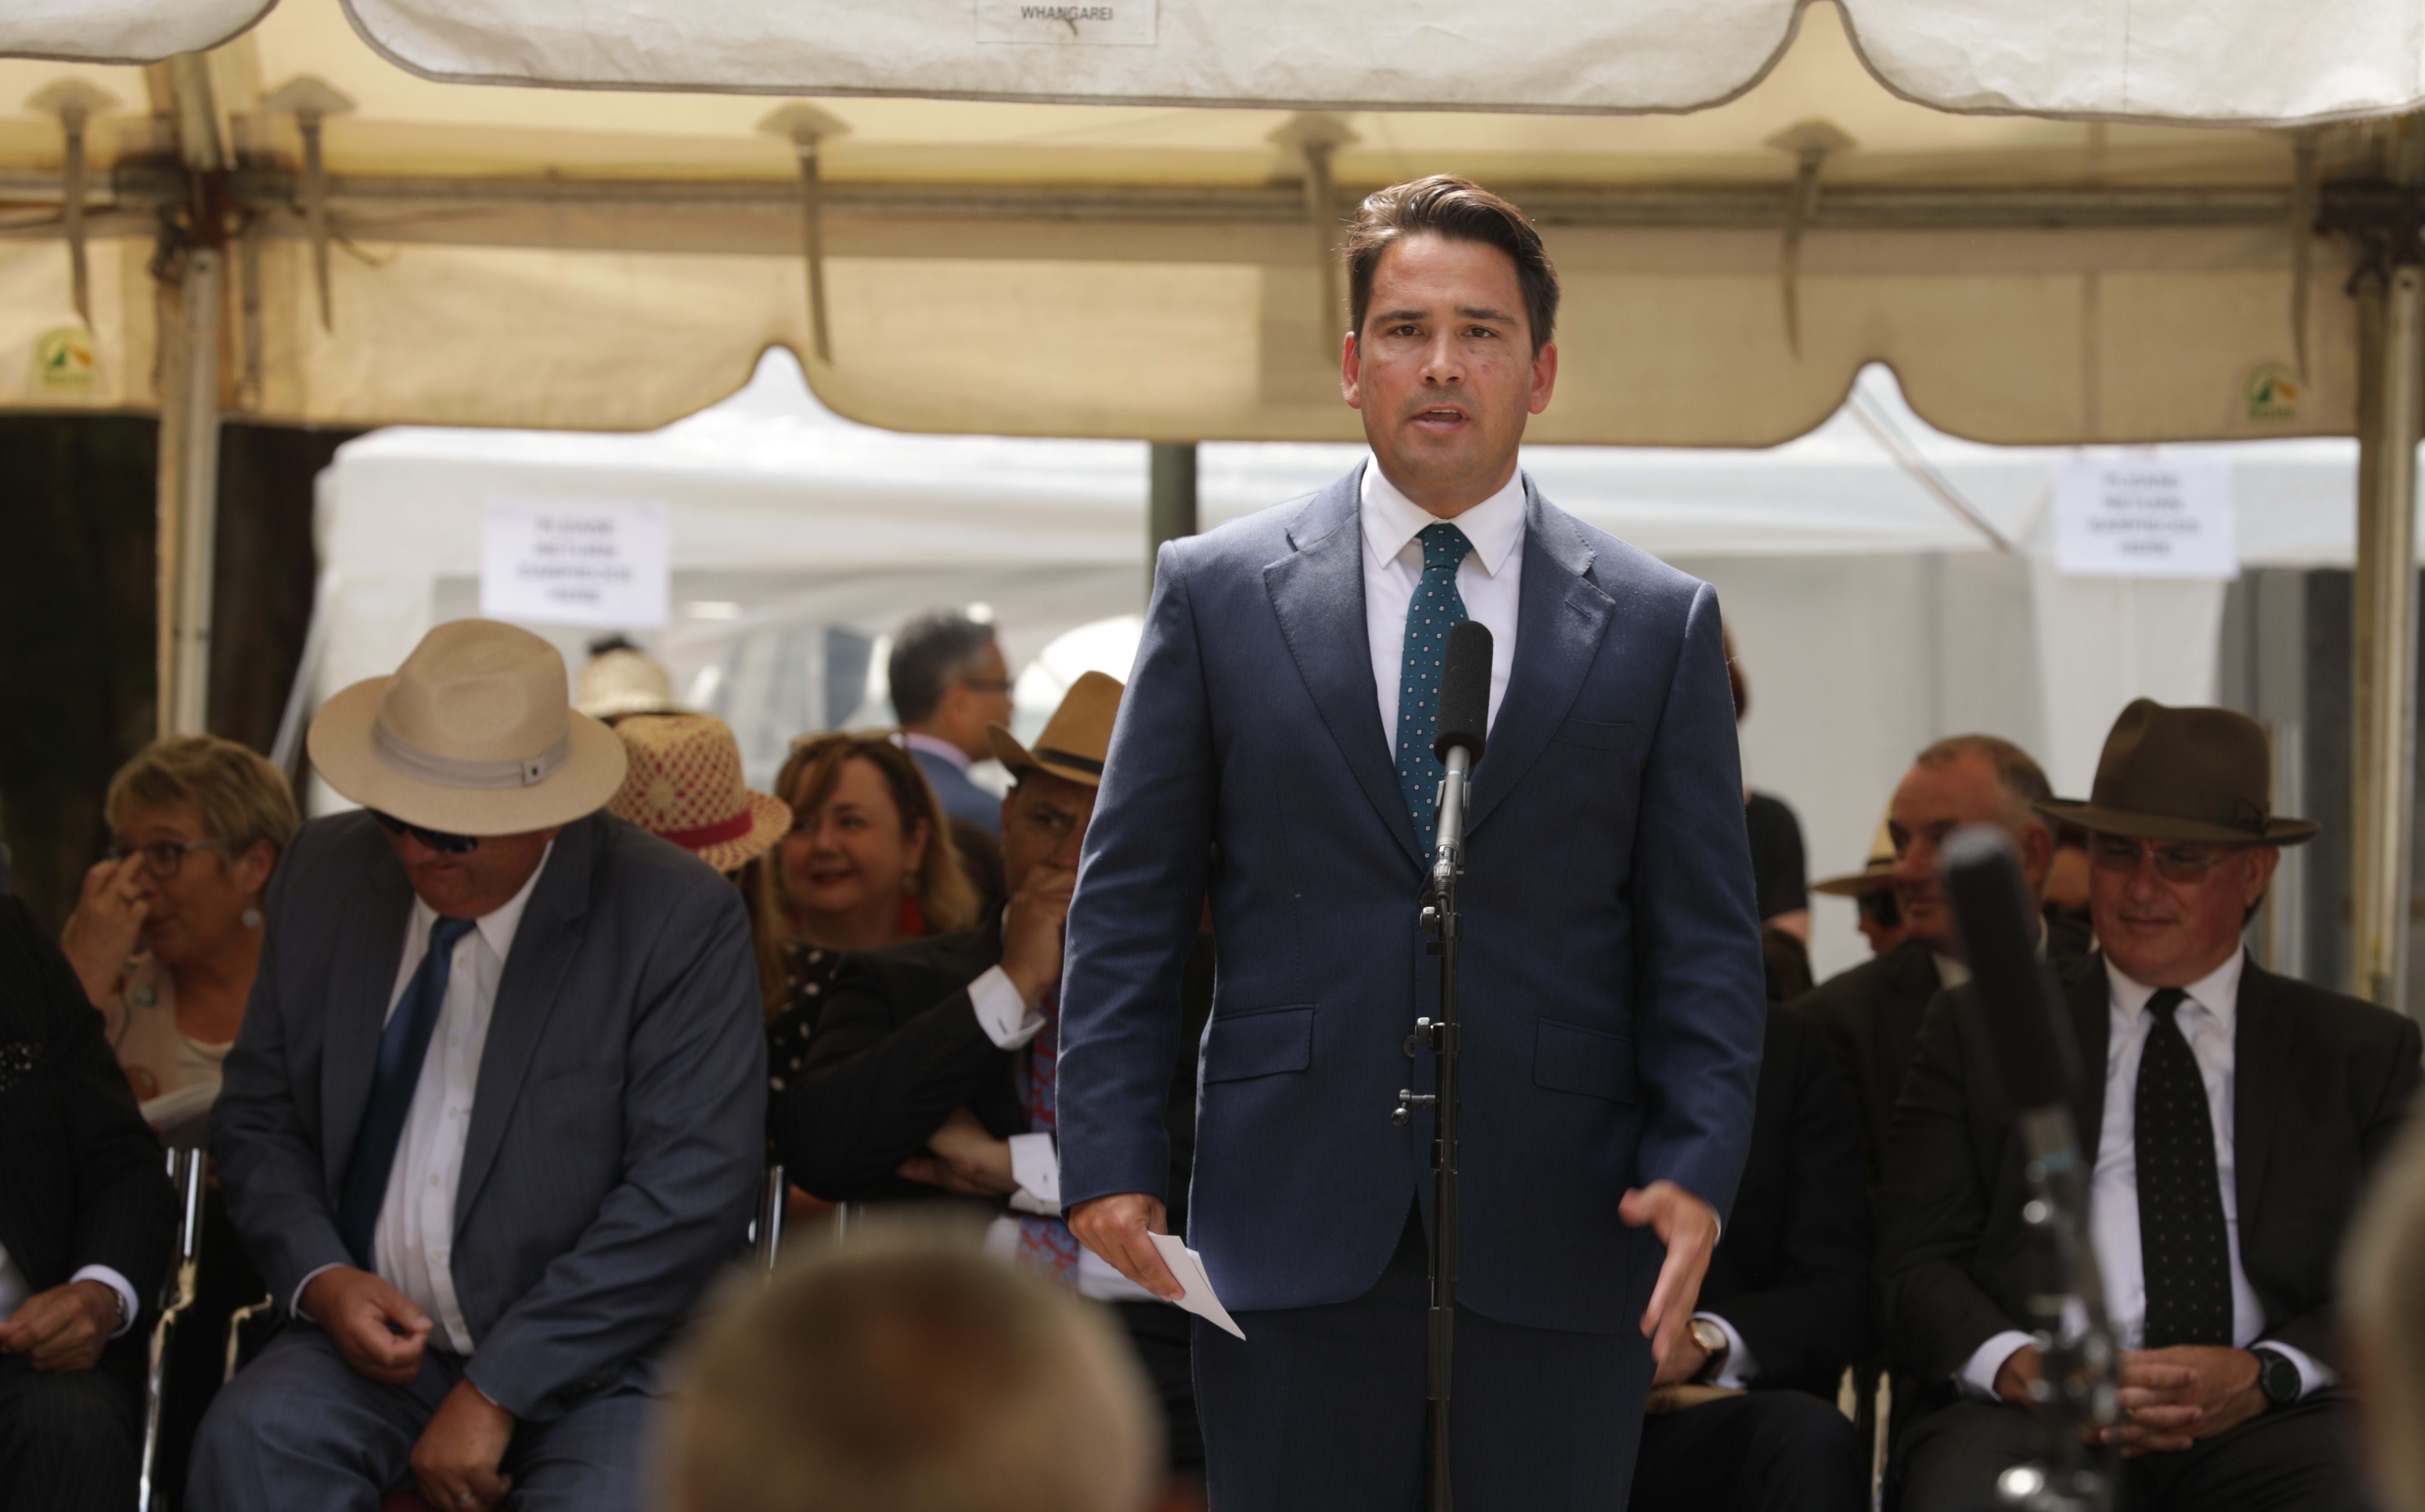 National Party leader Simon Bridges said the party was proud of its record of Treaty settlements under its former ministers.